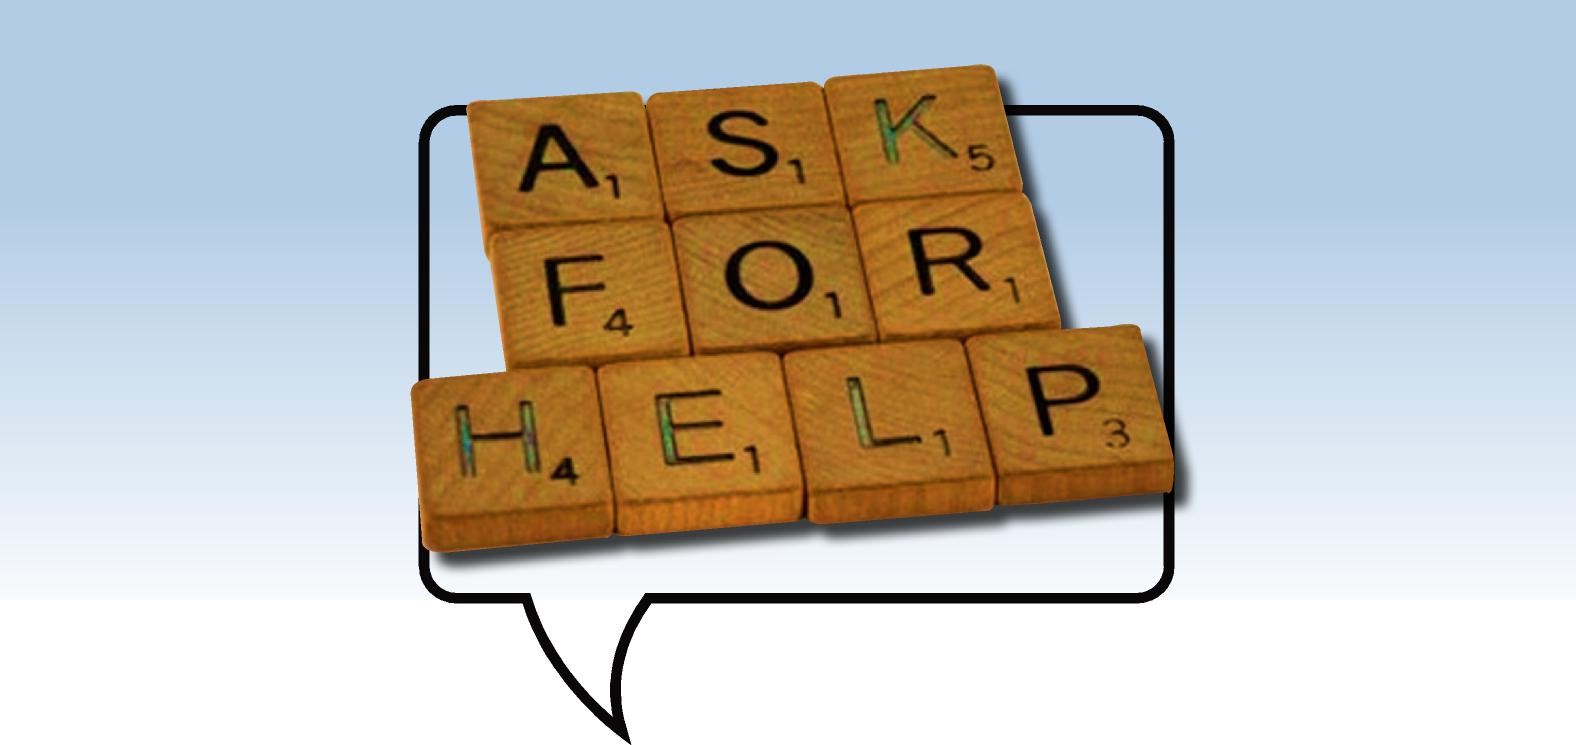 Ask For Help.jpg